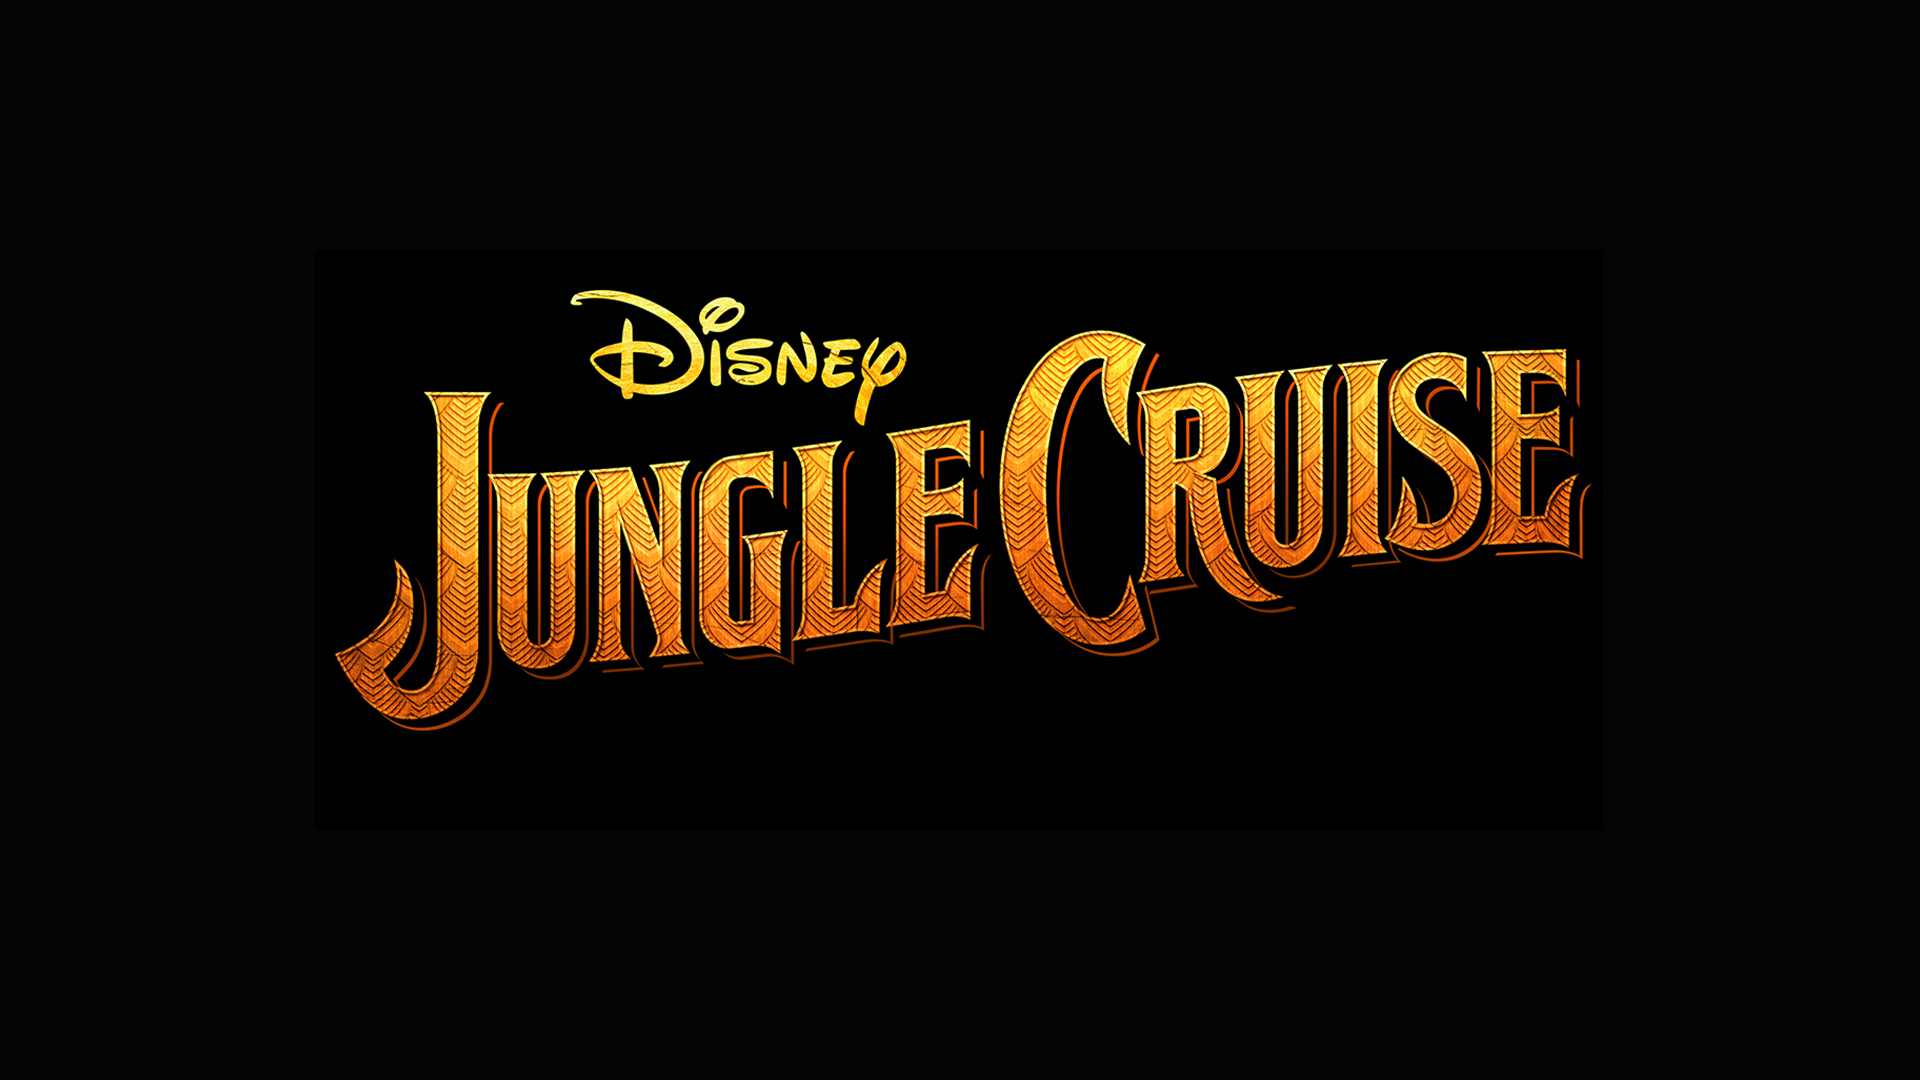 Brand New And Poster Debut For Disney's 'Jungle Cruise' Walt Disney Company